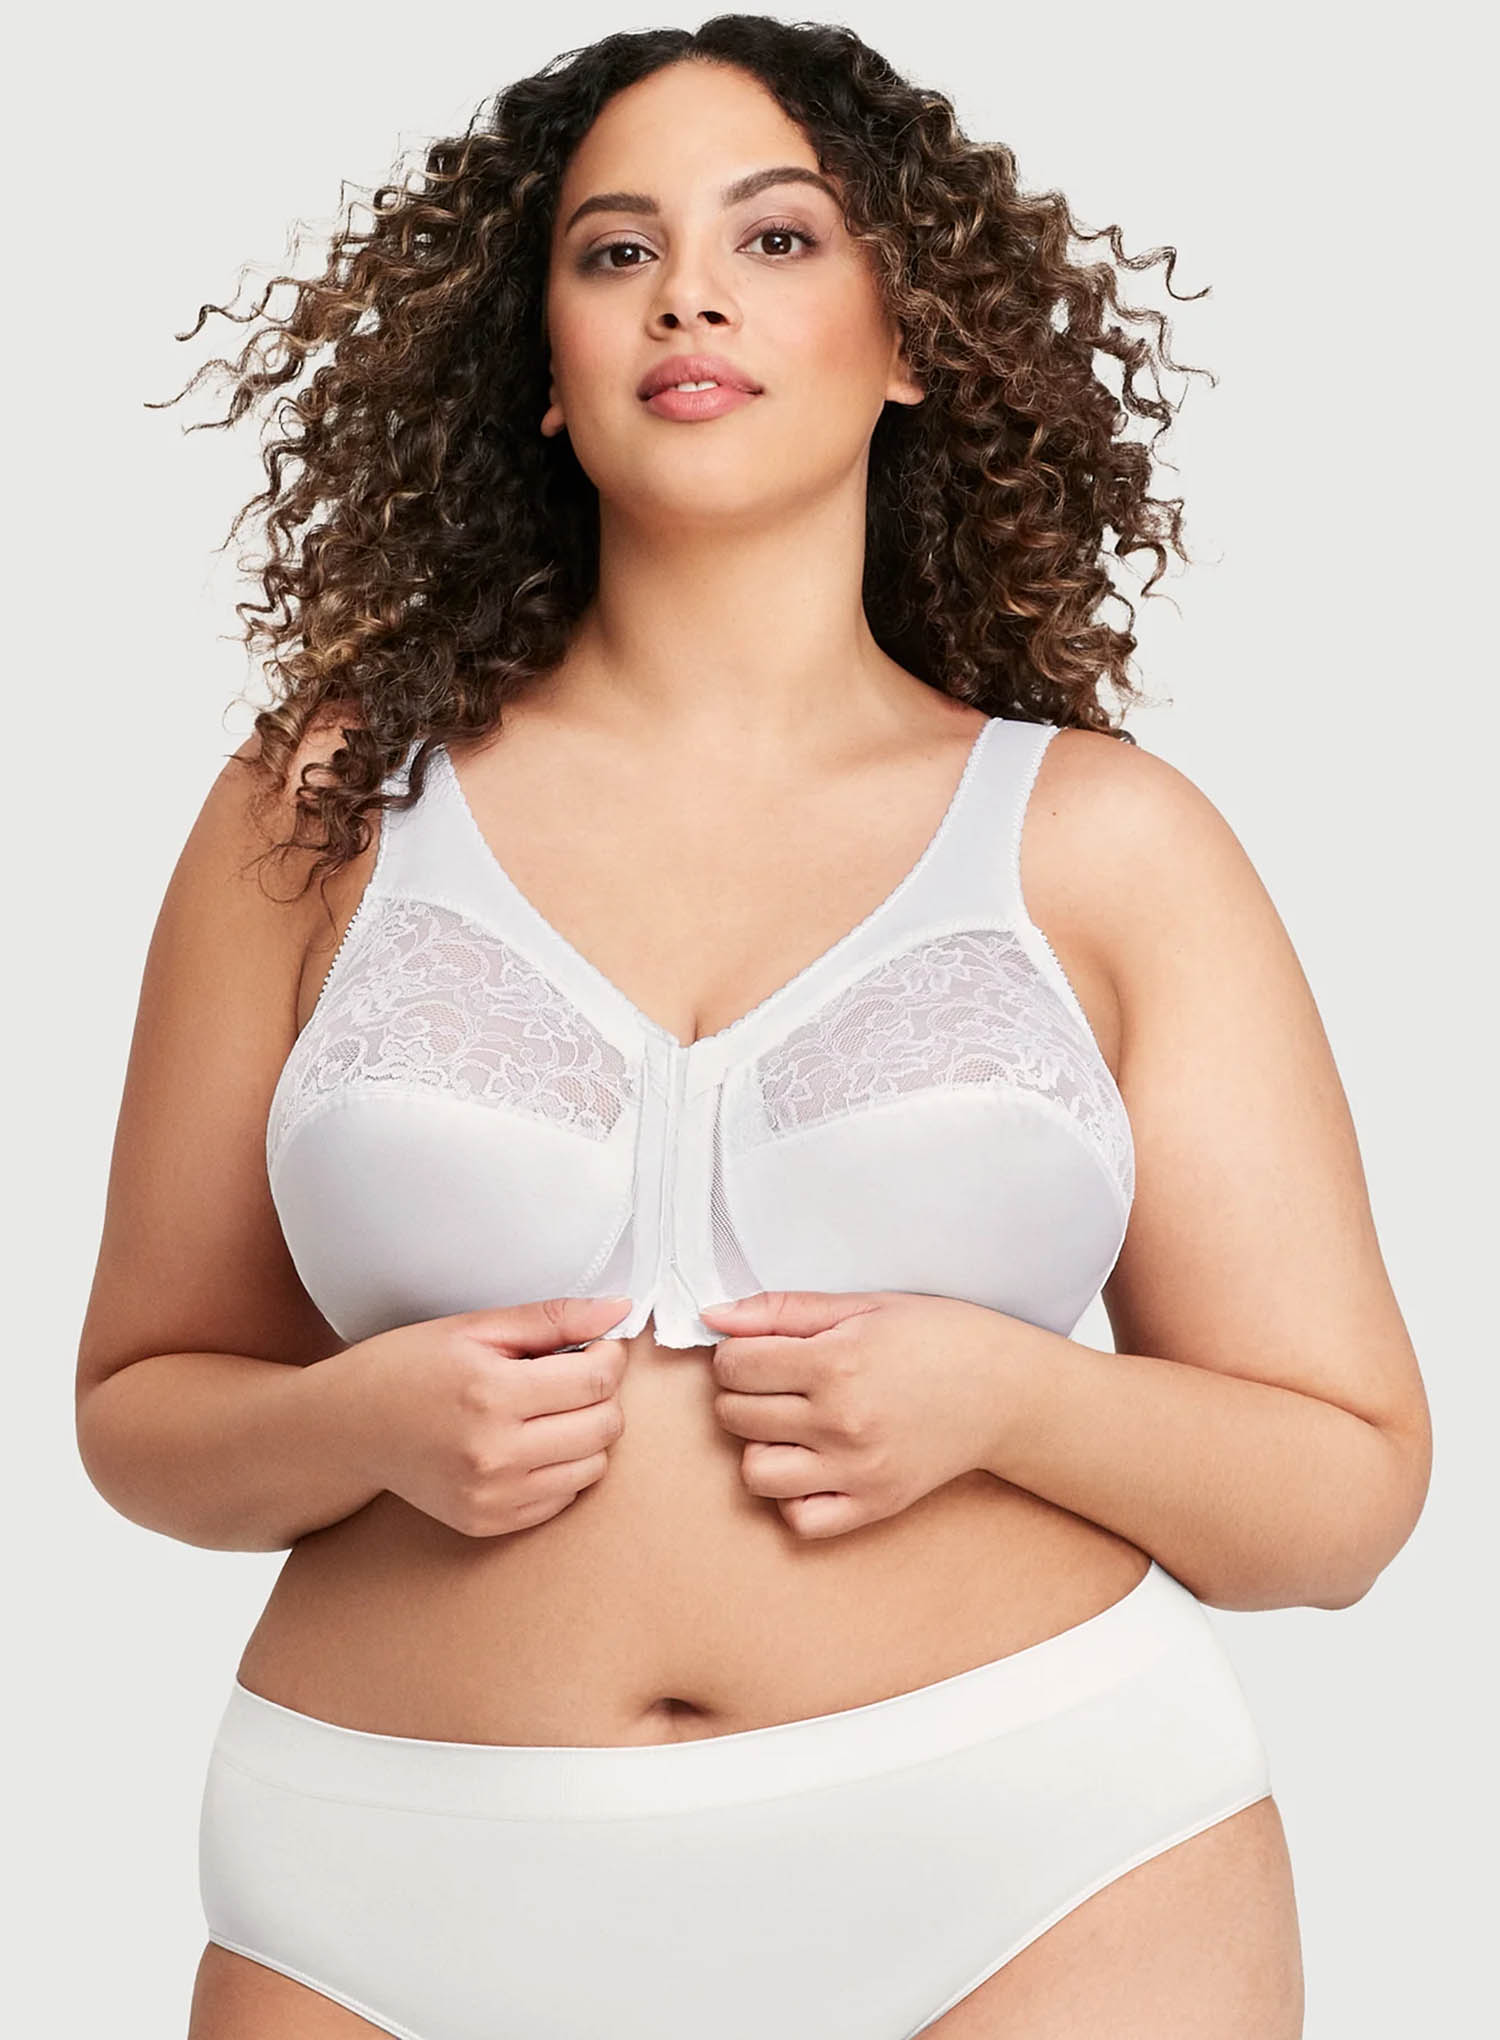 Breast Support Lift: OPP Bag Package Body Shaper Mastectomy Bras